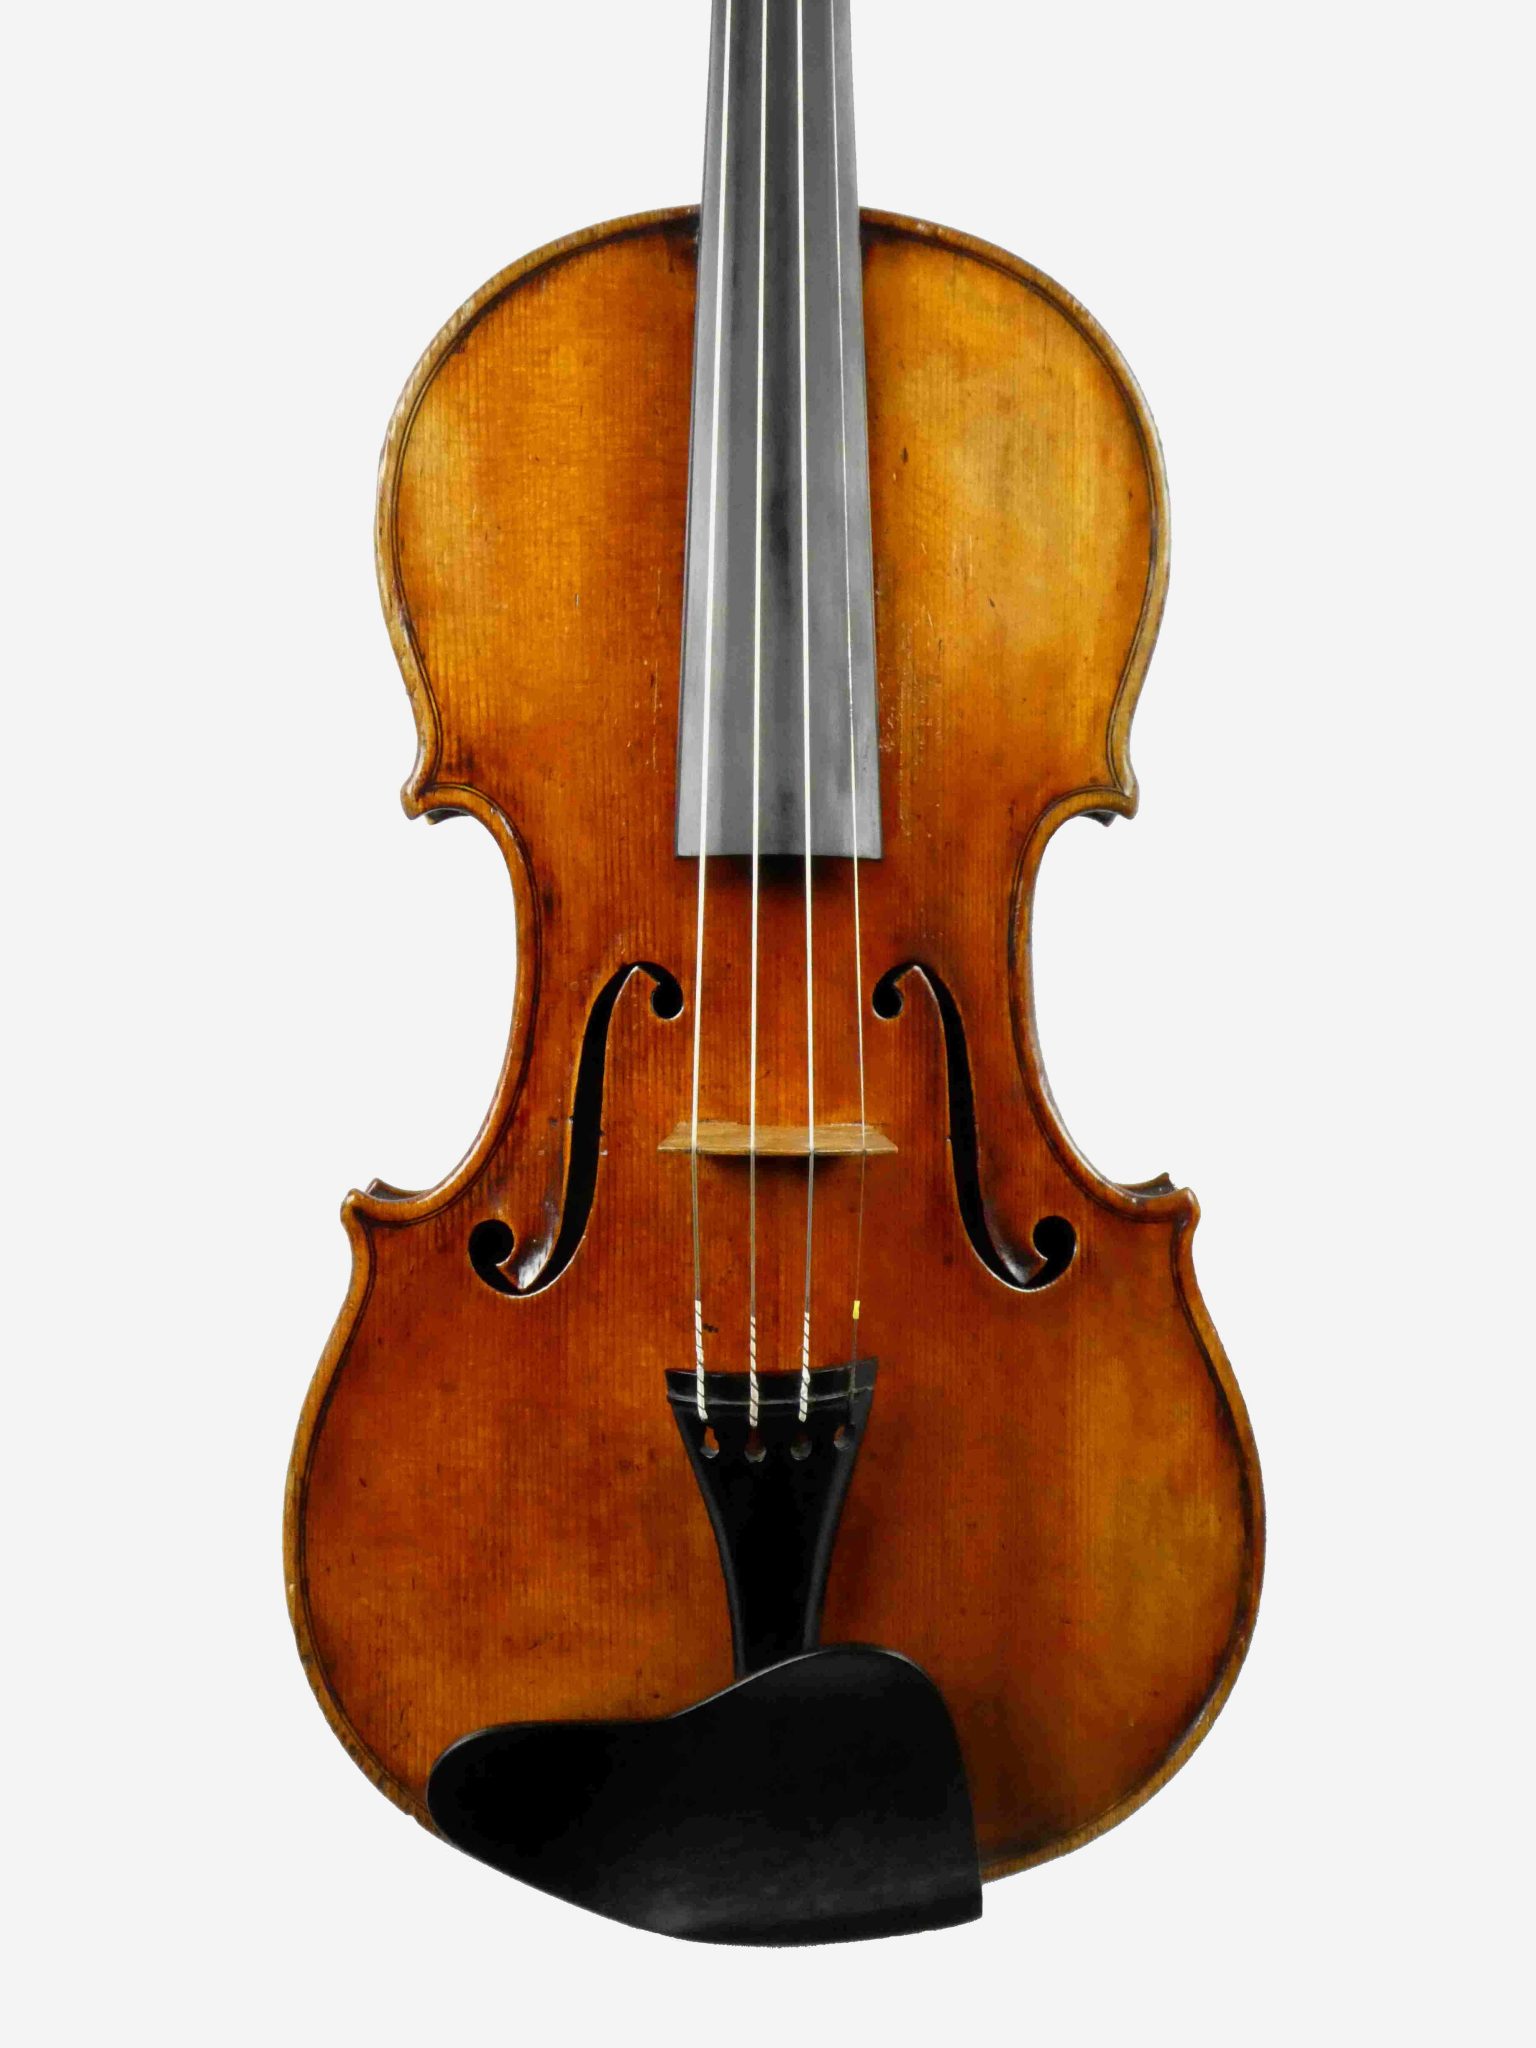 New and Used Violins for Sale UK | Cellos for Sale | Violin Repairs